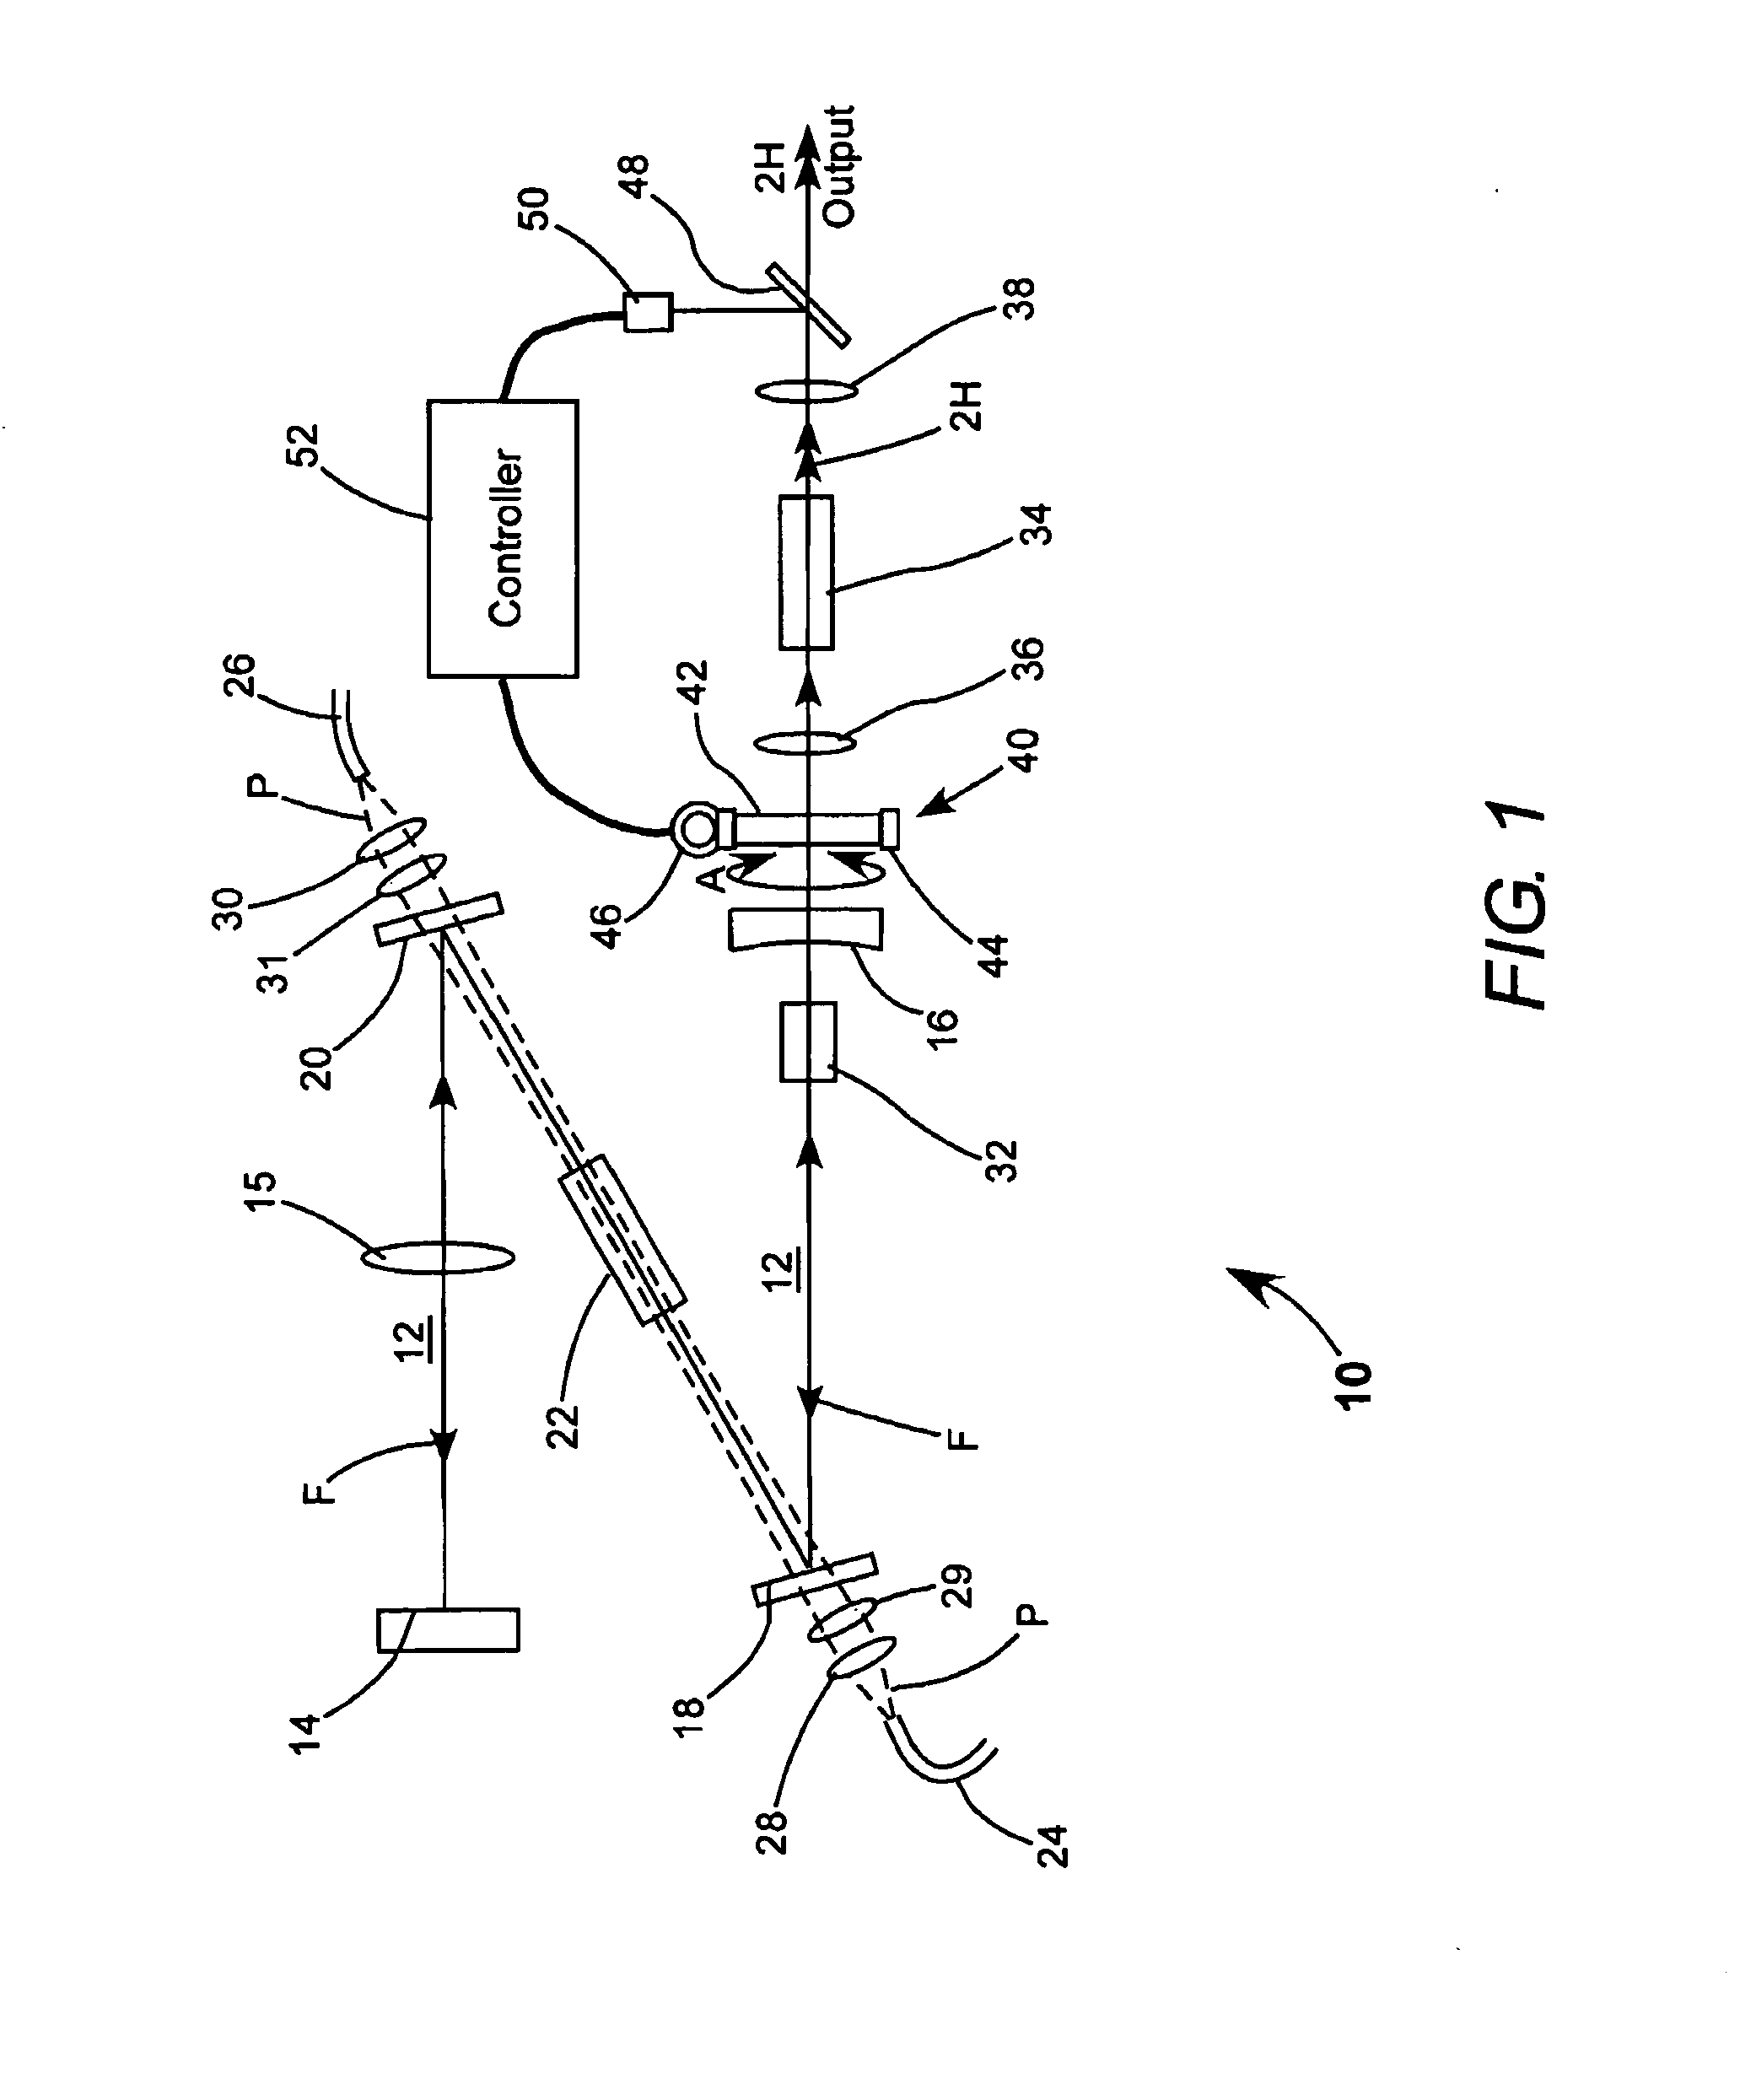 Output power control for harmonic-generating laser